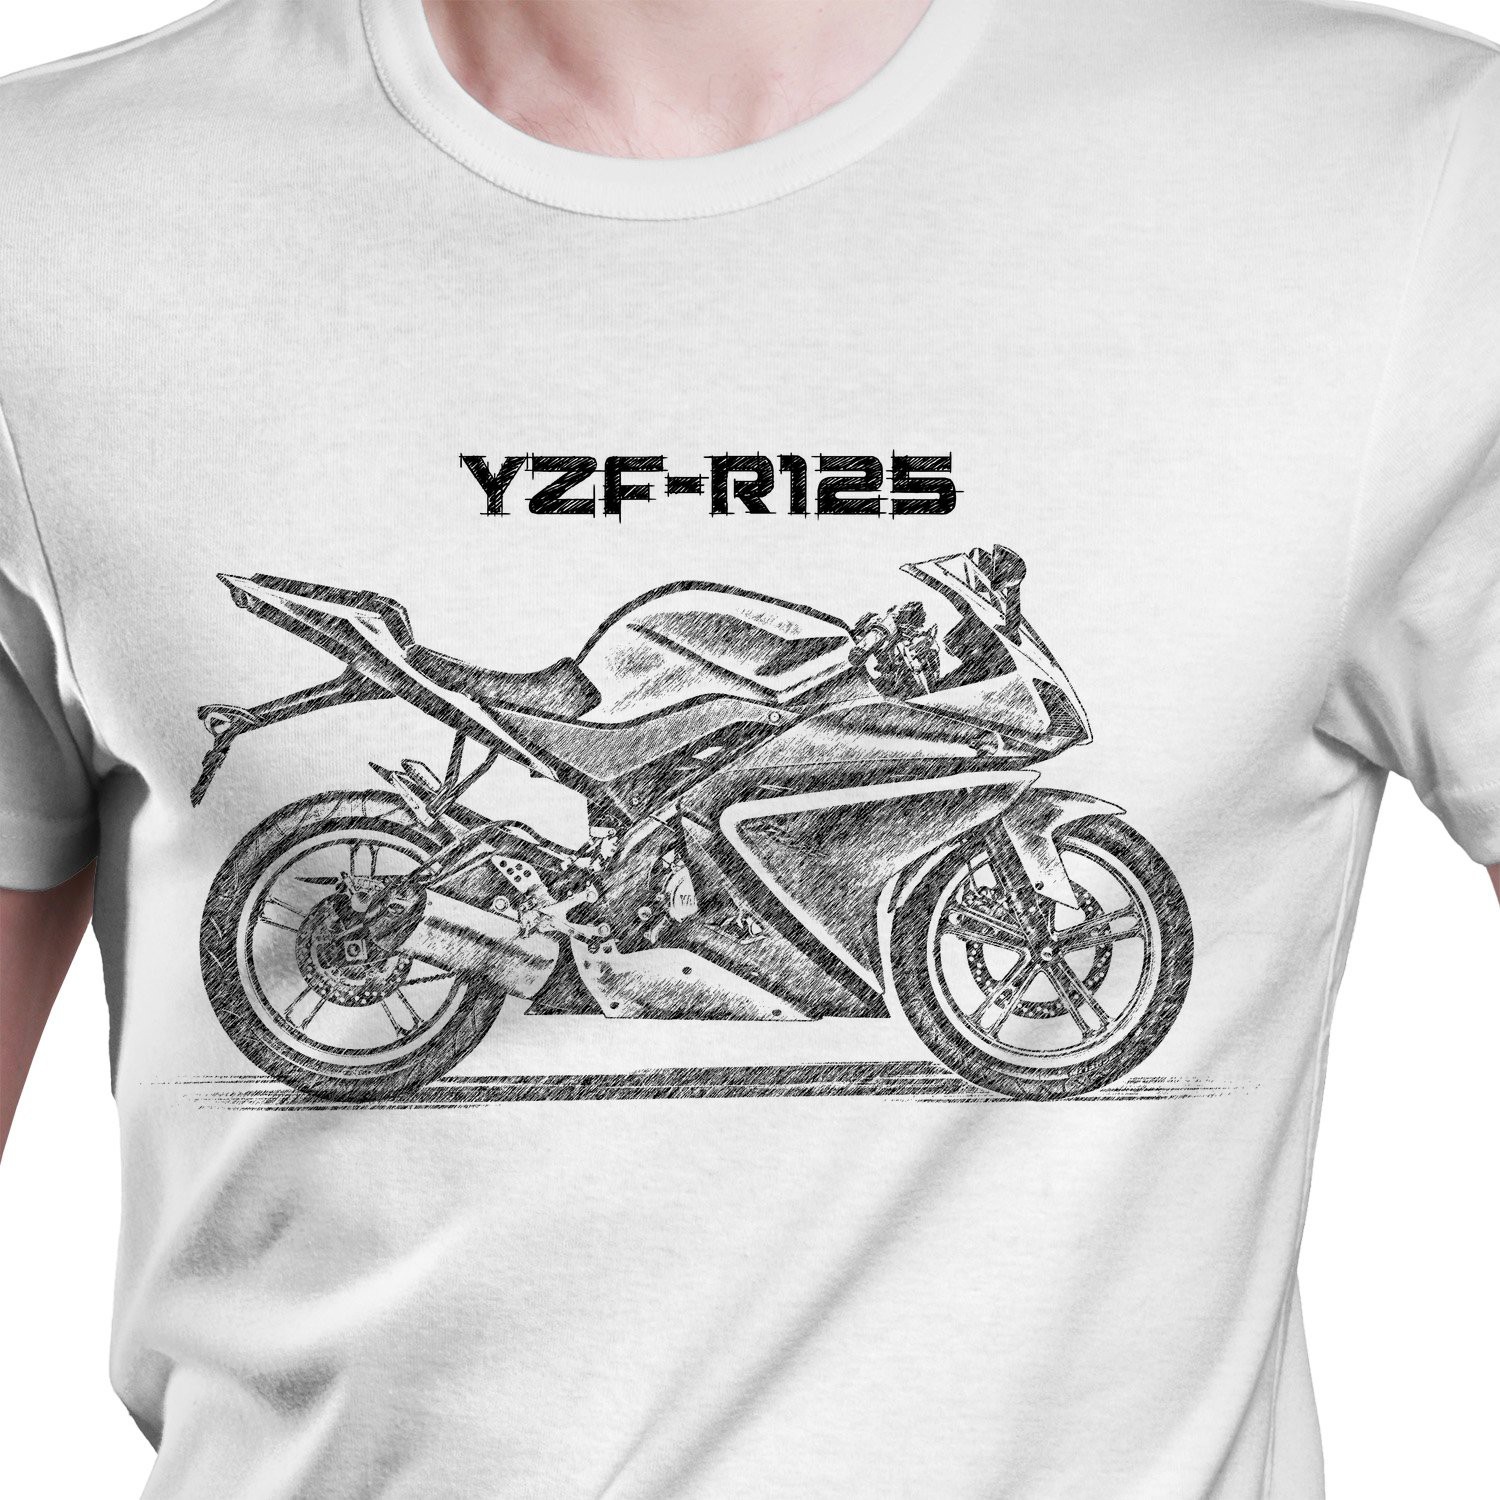 White T-shirt with Yamaha YZF R125. Gift for motorcyclist.